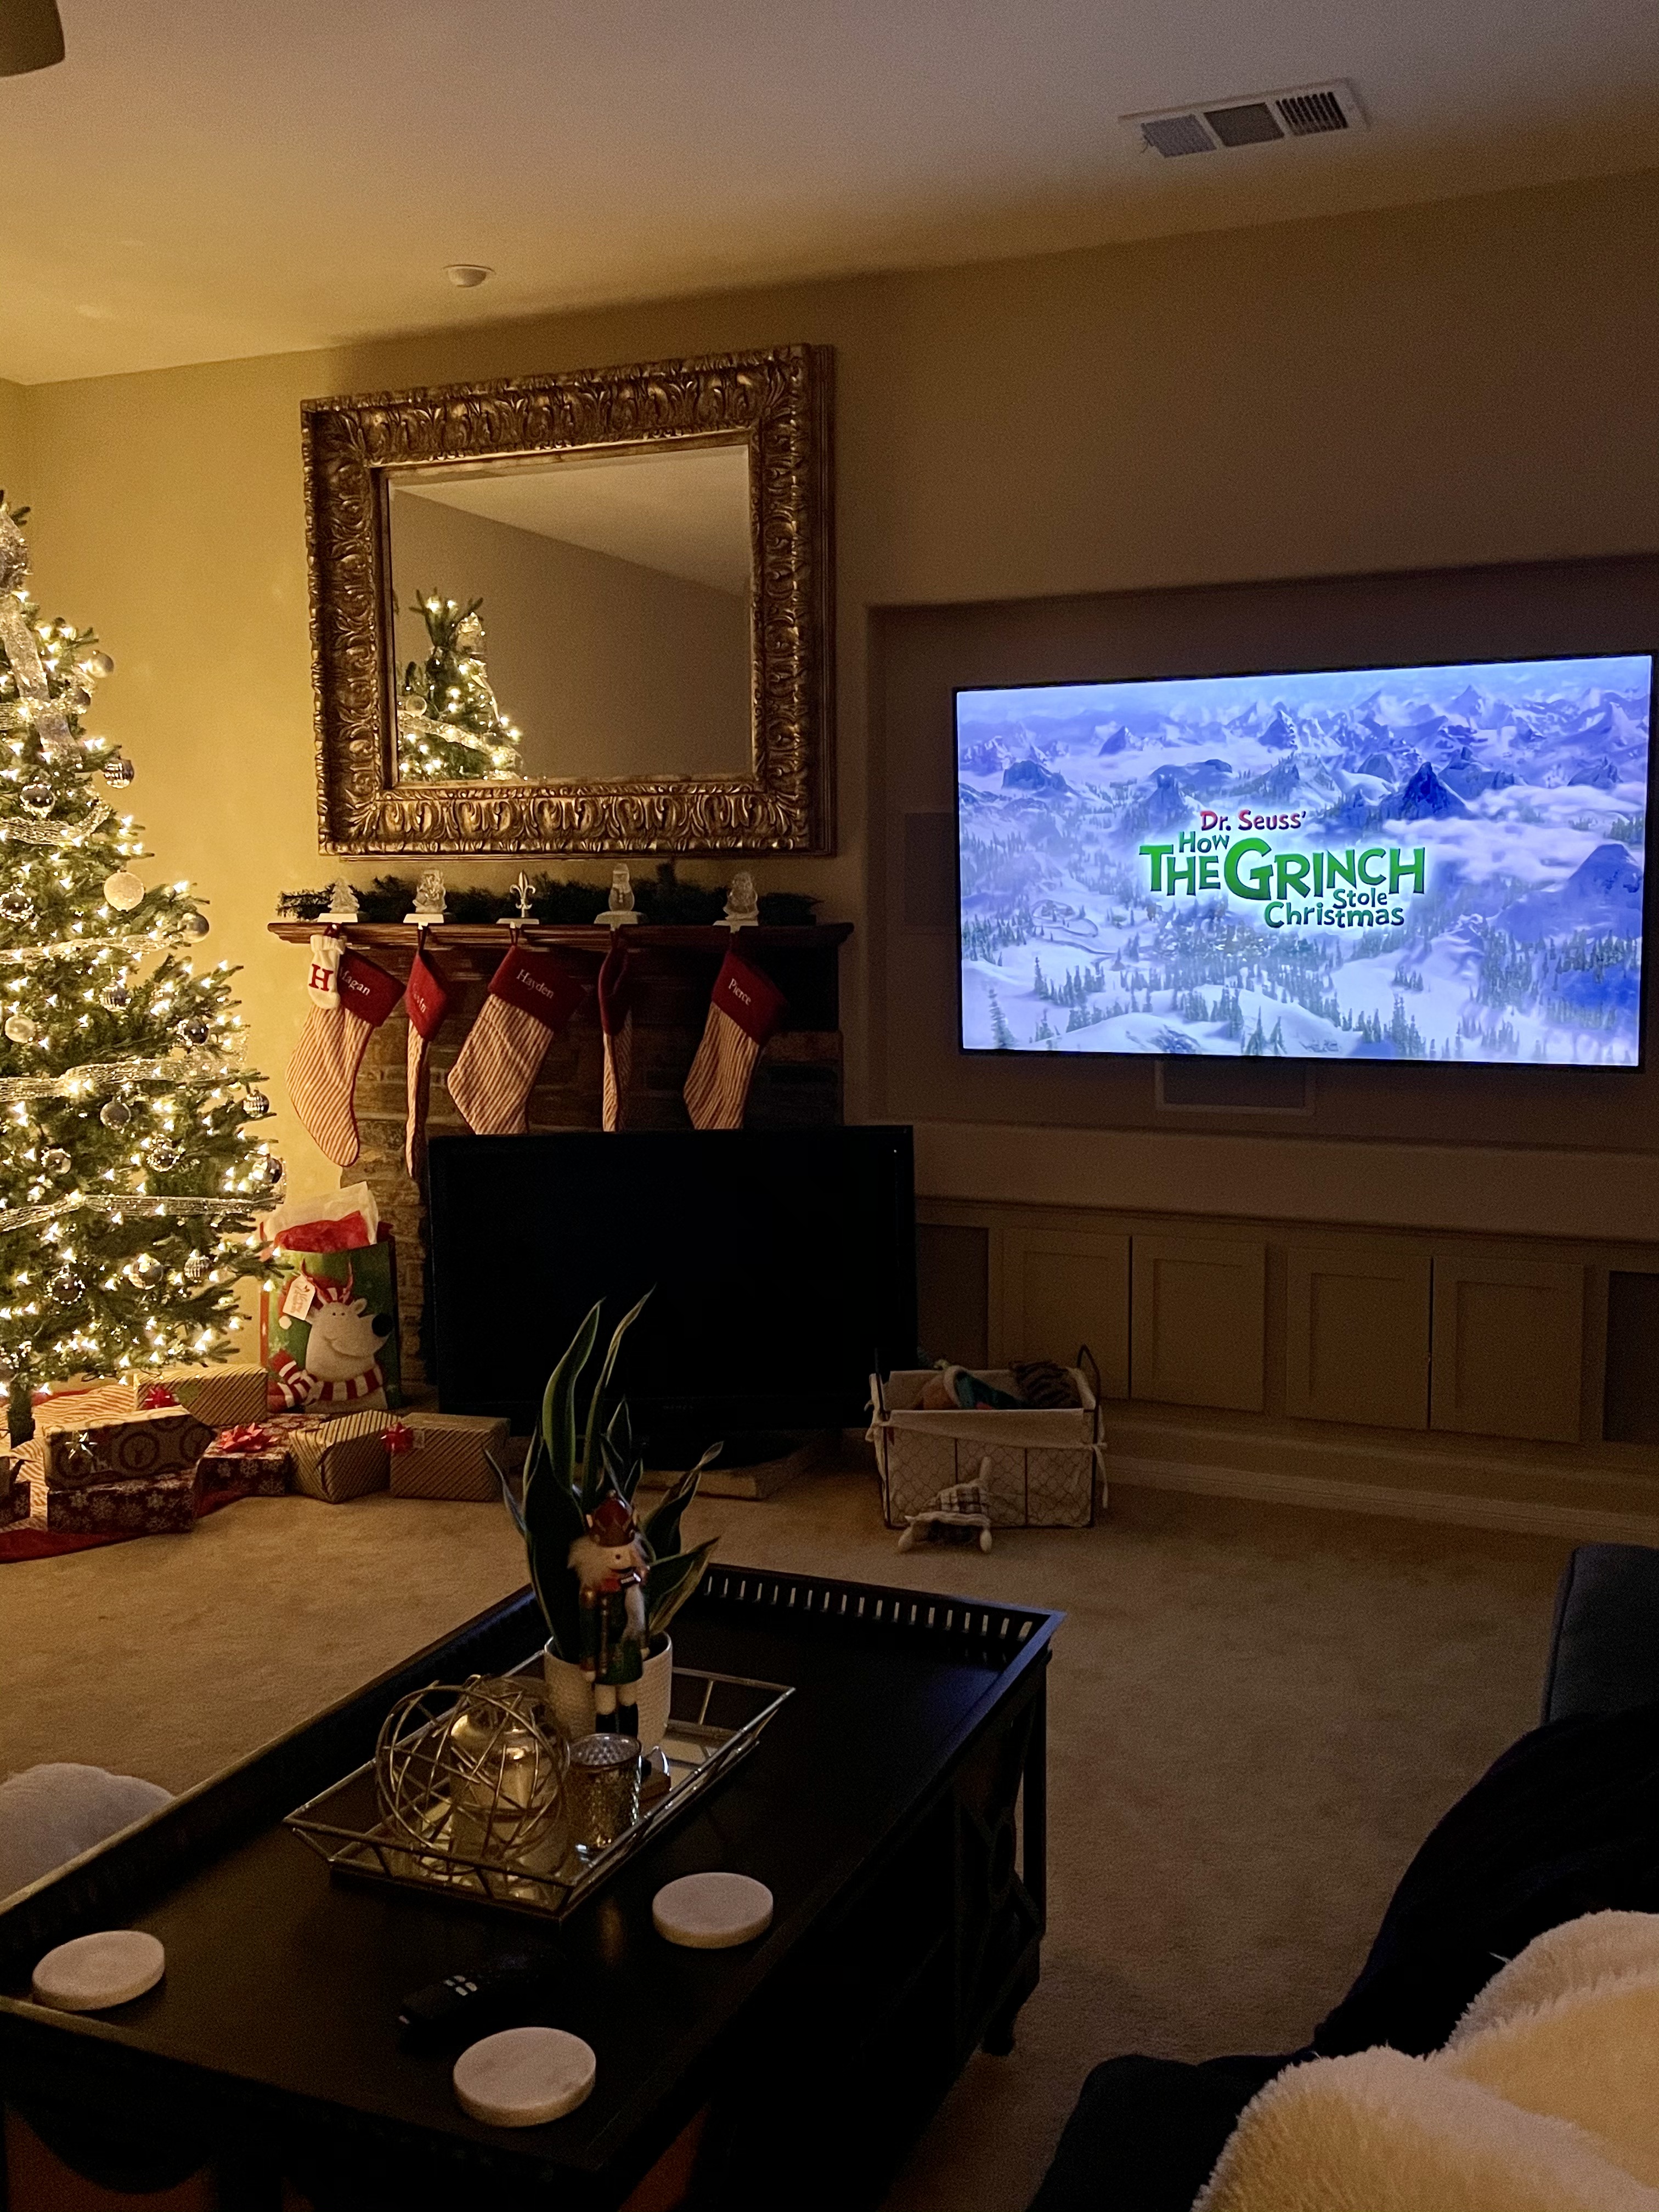 Cozy family room with The Grinch Who Stole Christmas on the TV